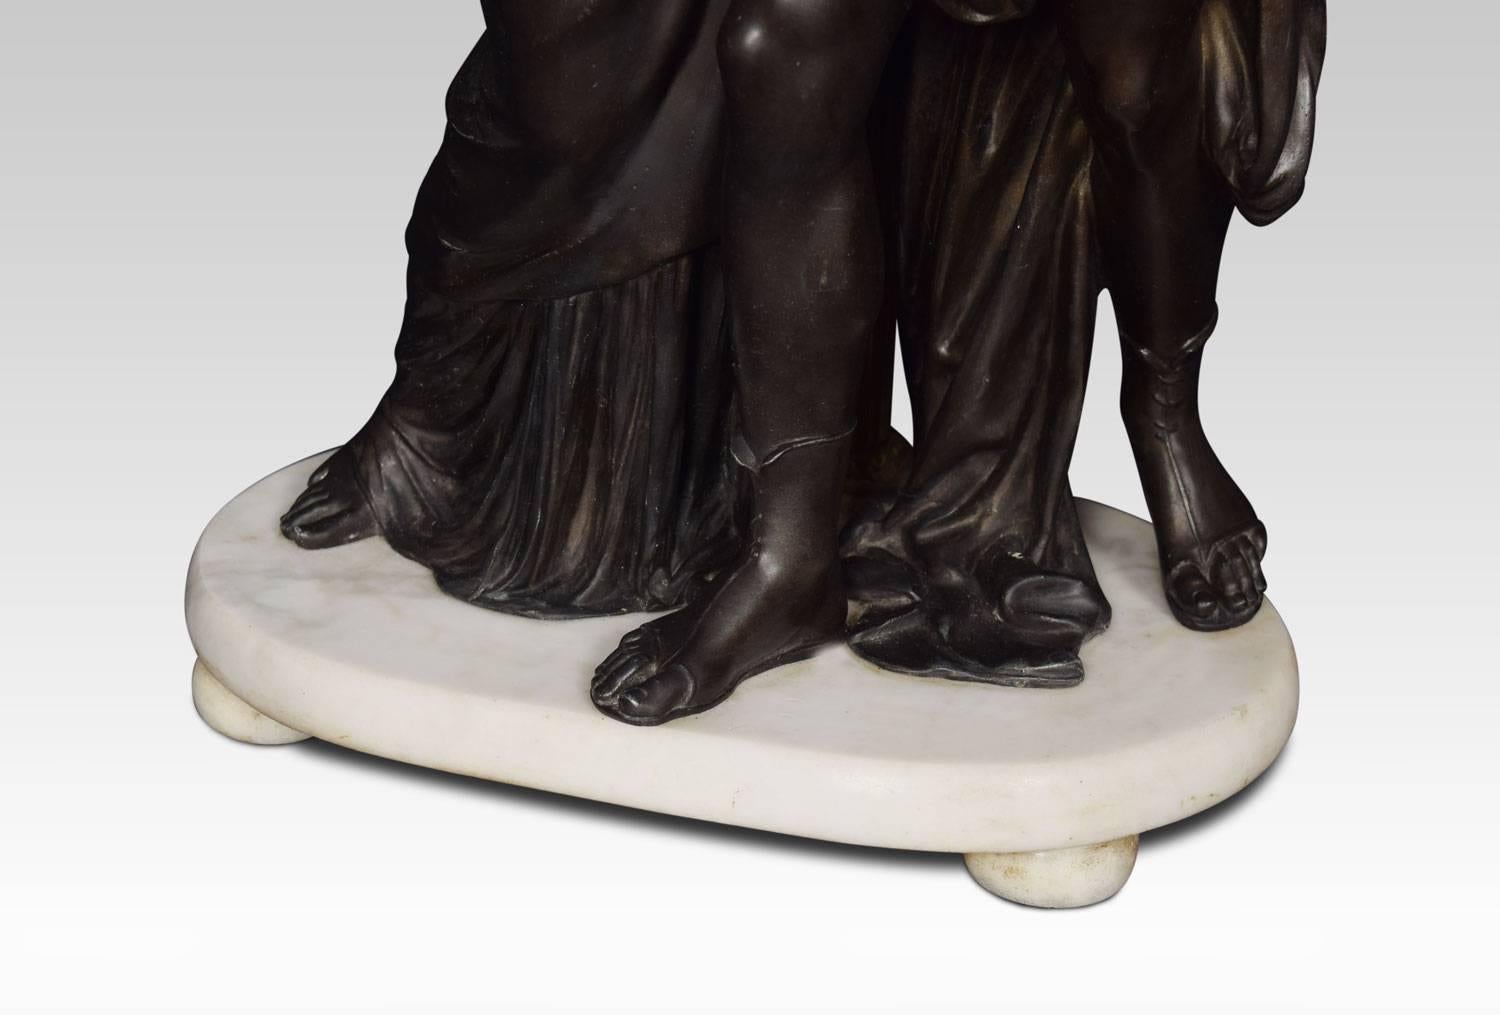 19th Century Spelter Lamp of Two Figures Embracing